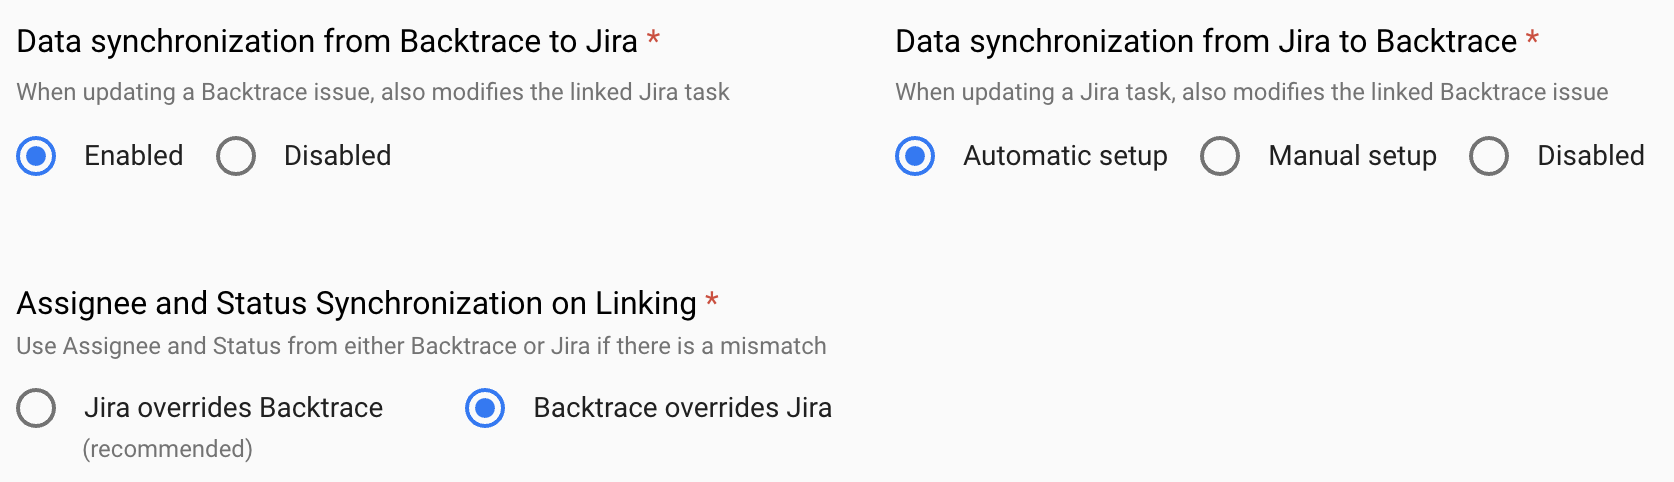 Shows how to enable two-way sync from Backtrace and Jira.